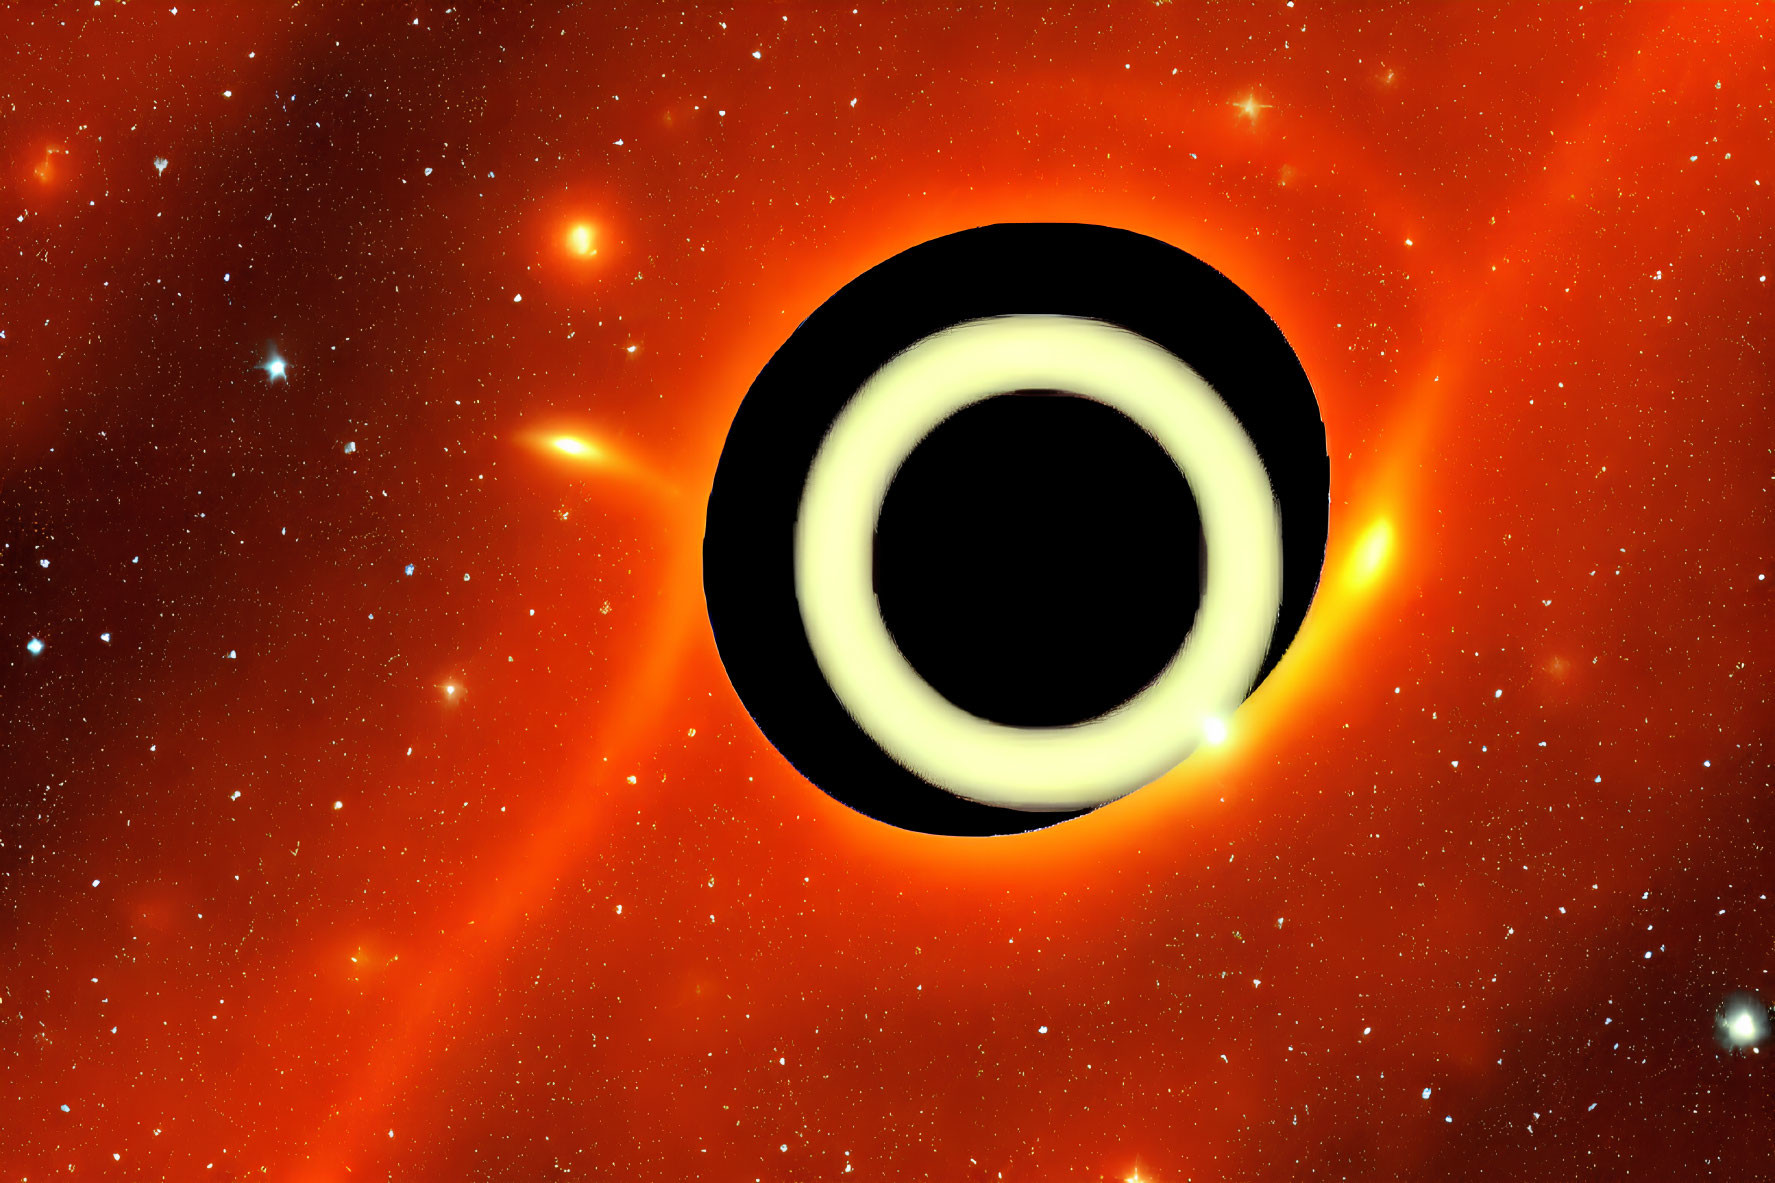 Digital illustration: Black hole with accretion disc in star-filled red nebula